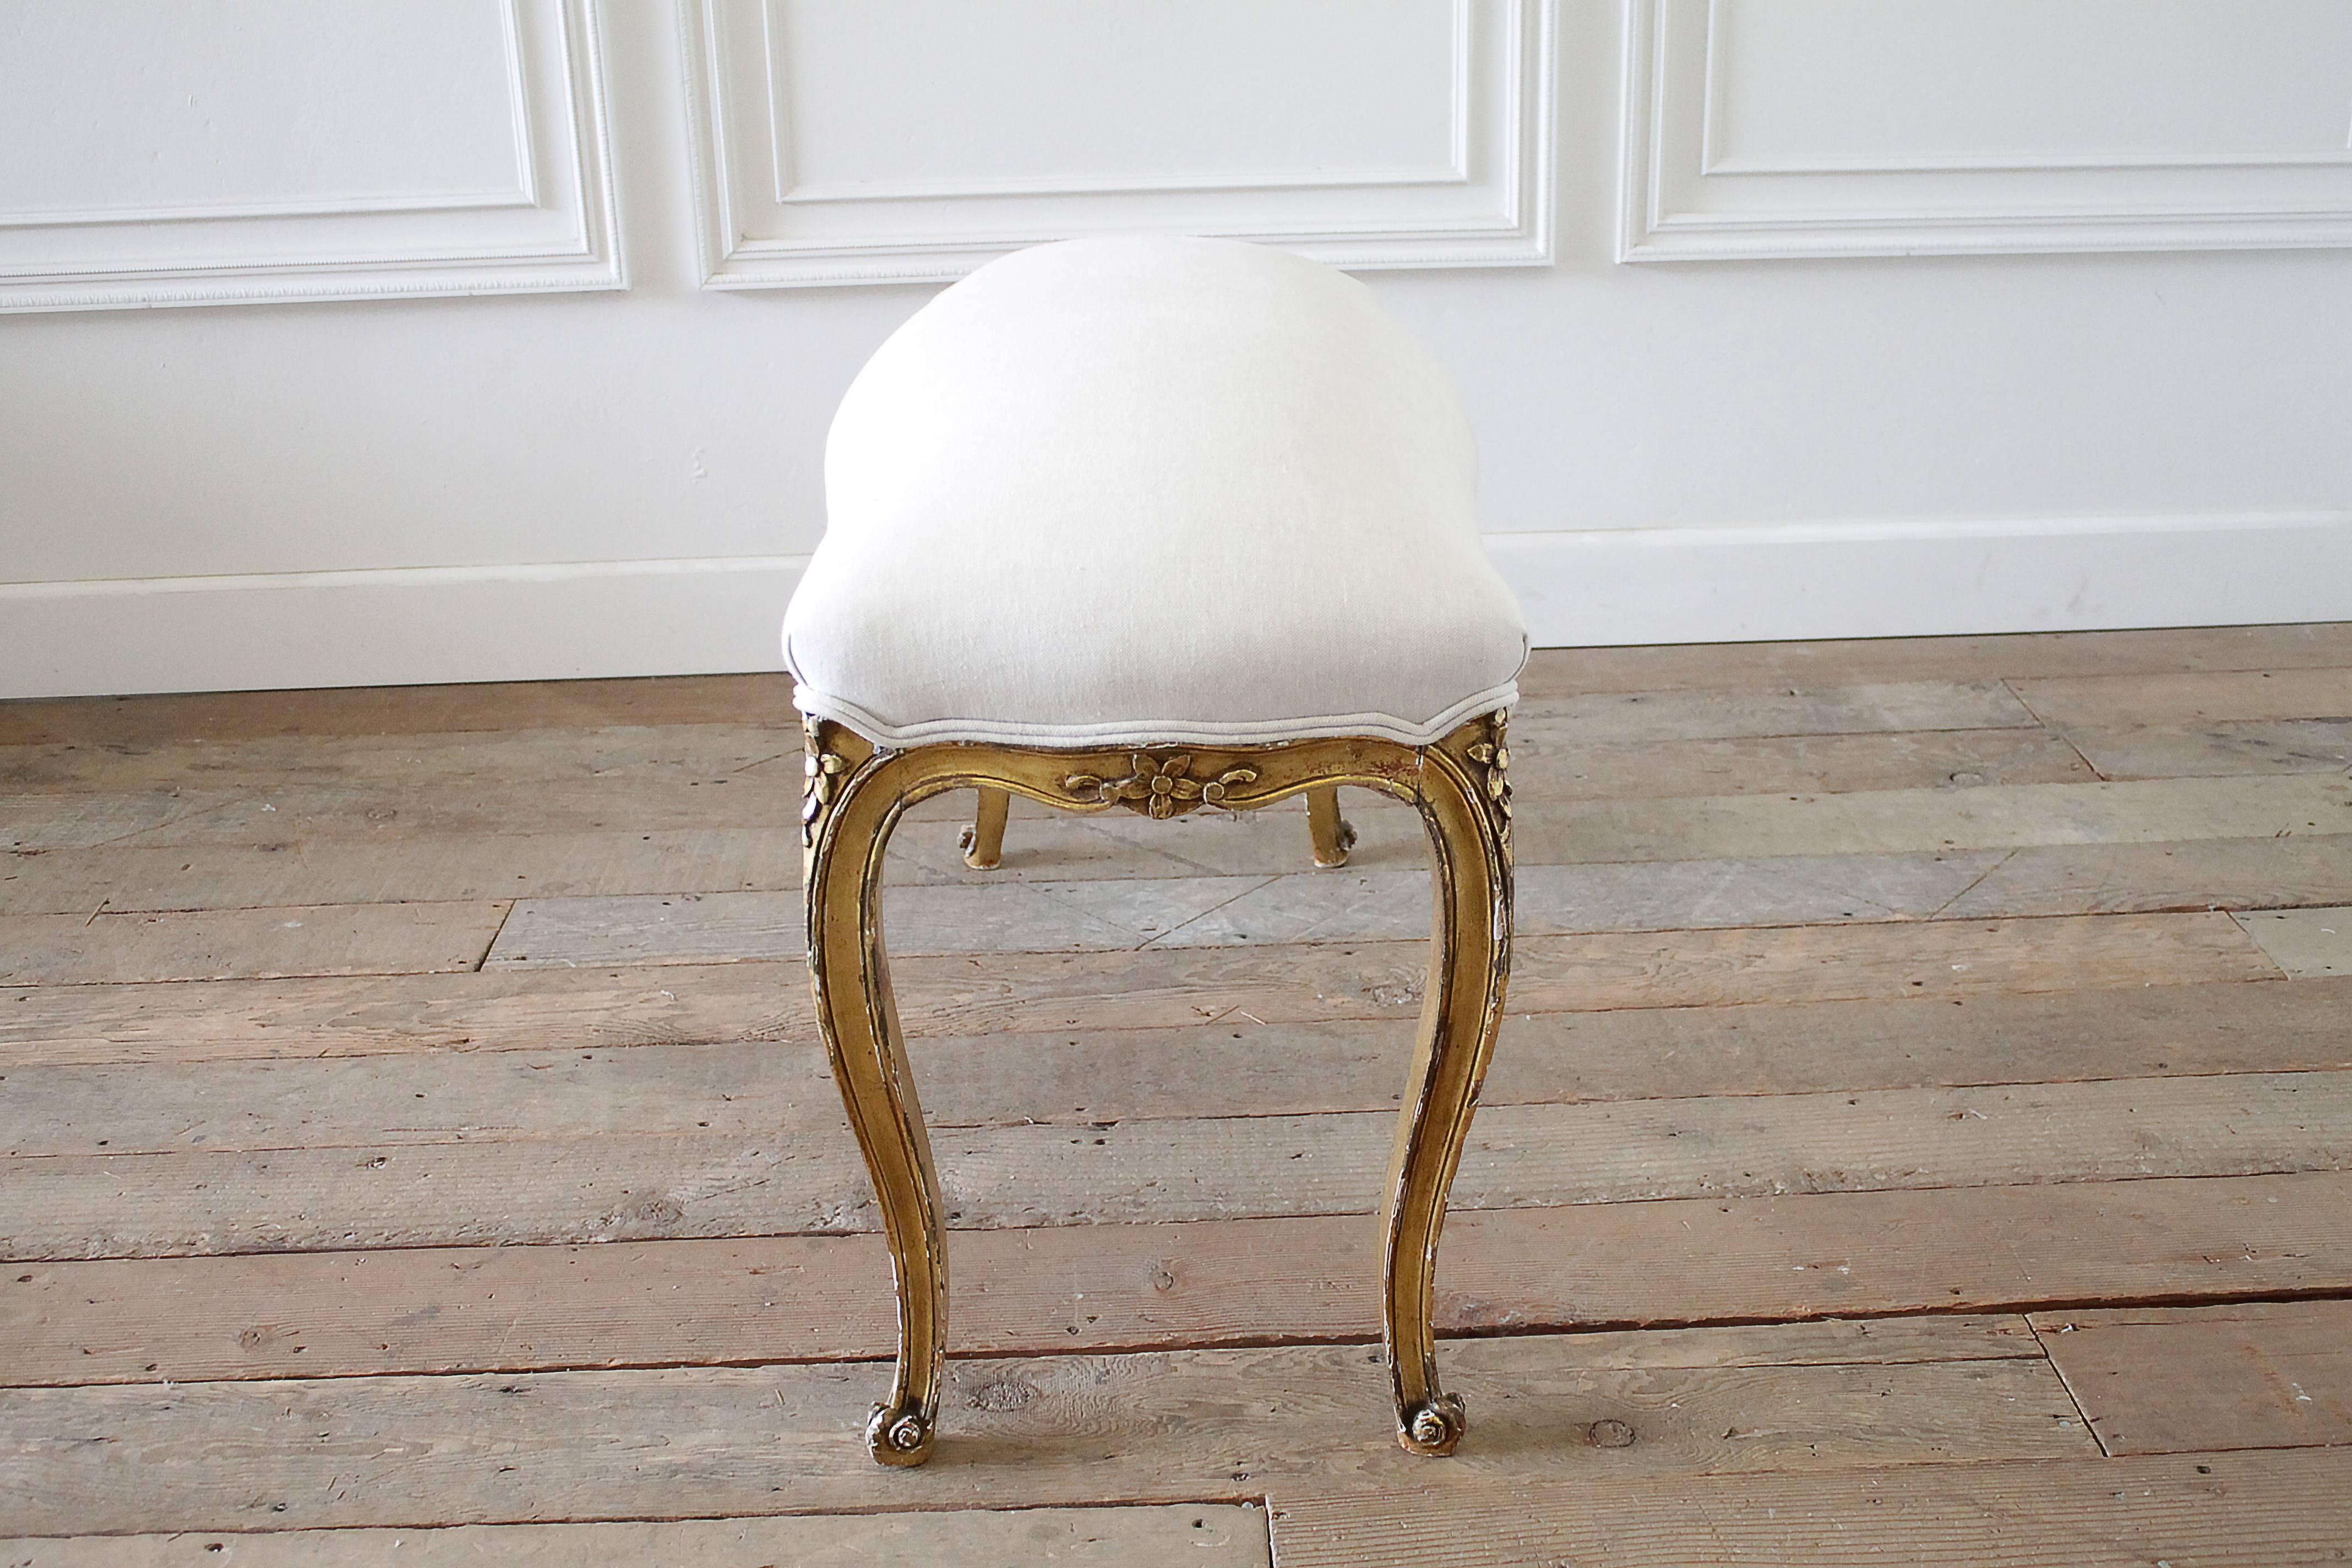 Beautiful carved Louis XV style giltwood bench we have upholstered in our Organic Irish linen, and finished with a double welt. The frame is sturdy, and shows signs of a weathered finish. Very nice patina, and linen is a light oatmeal